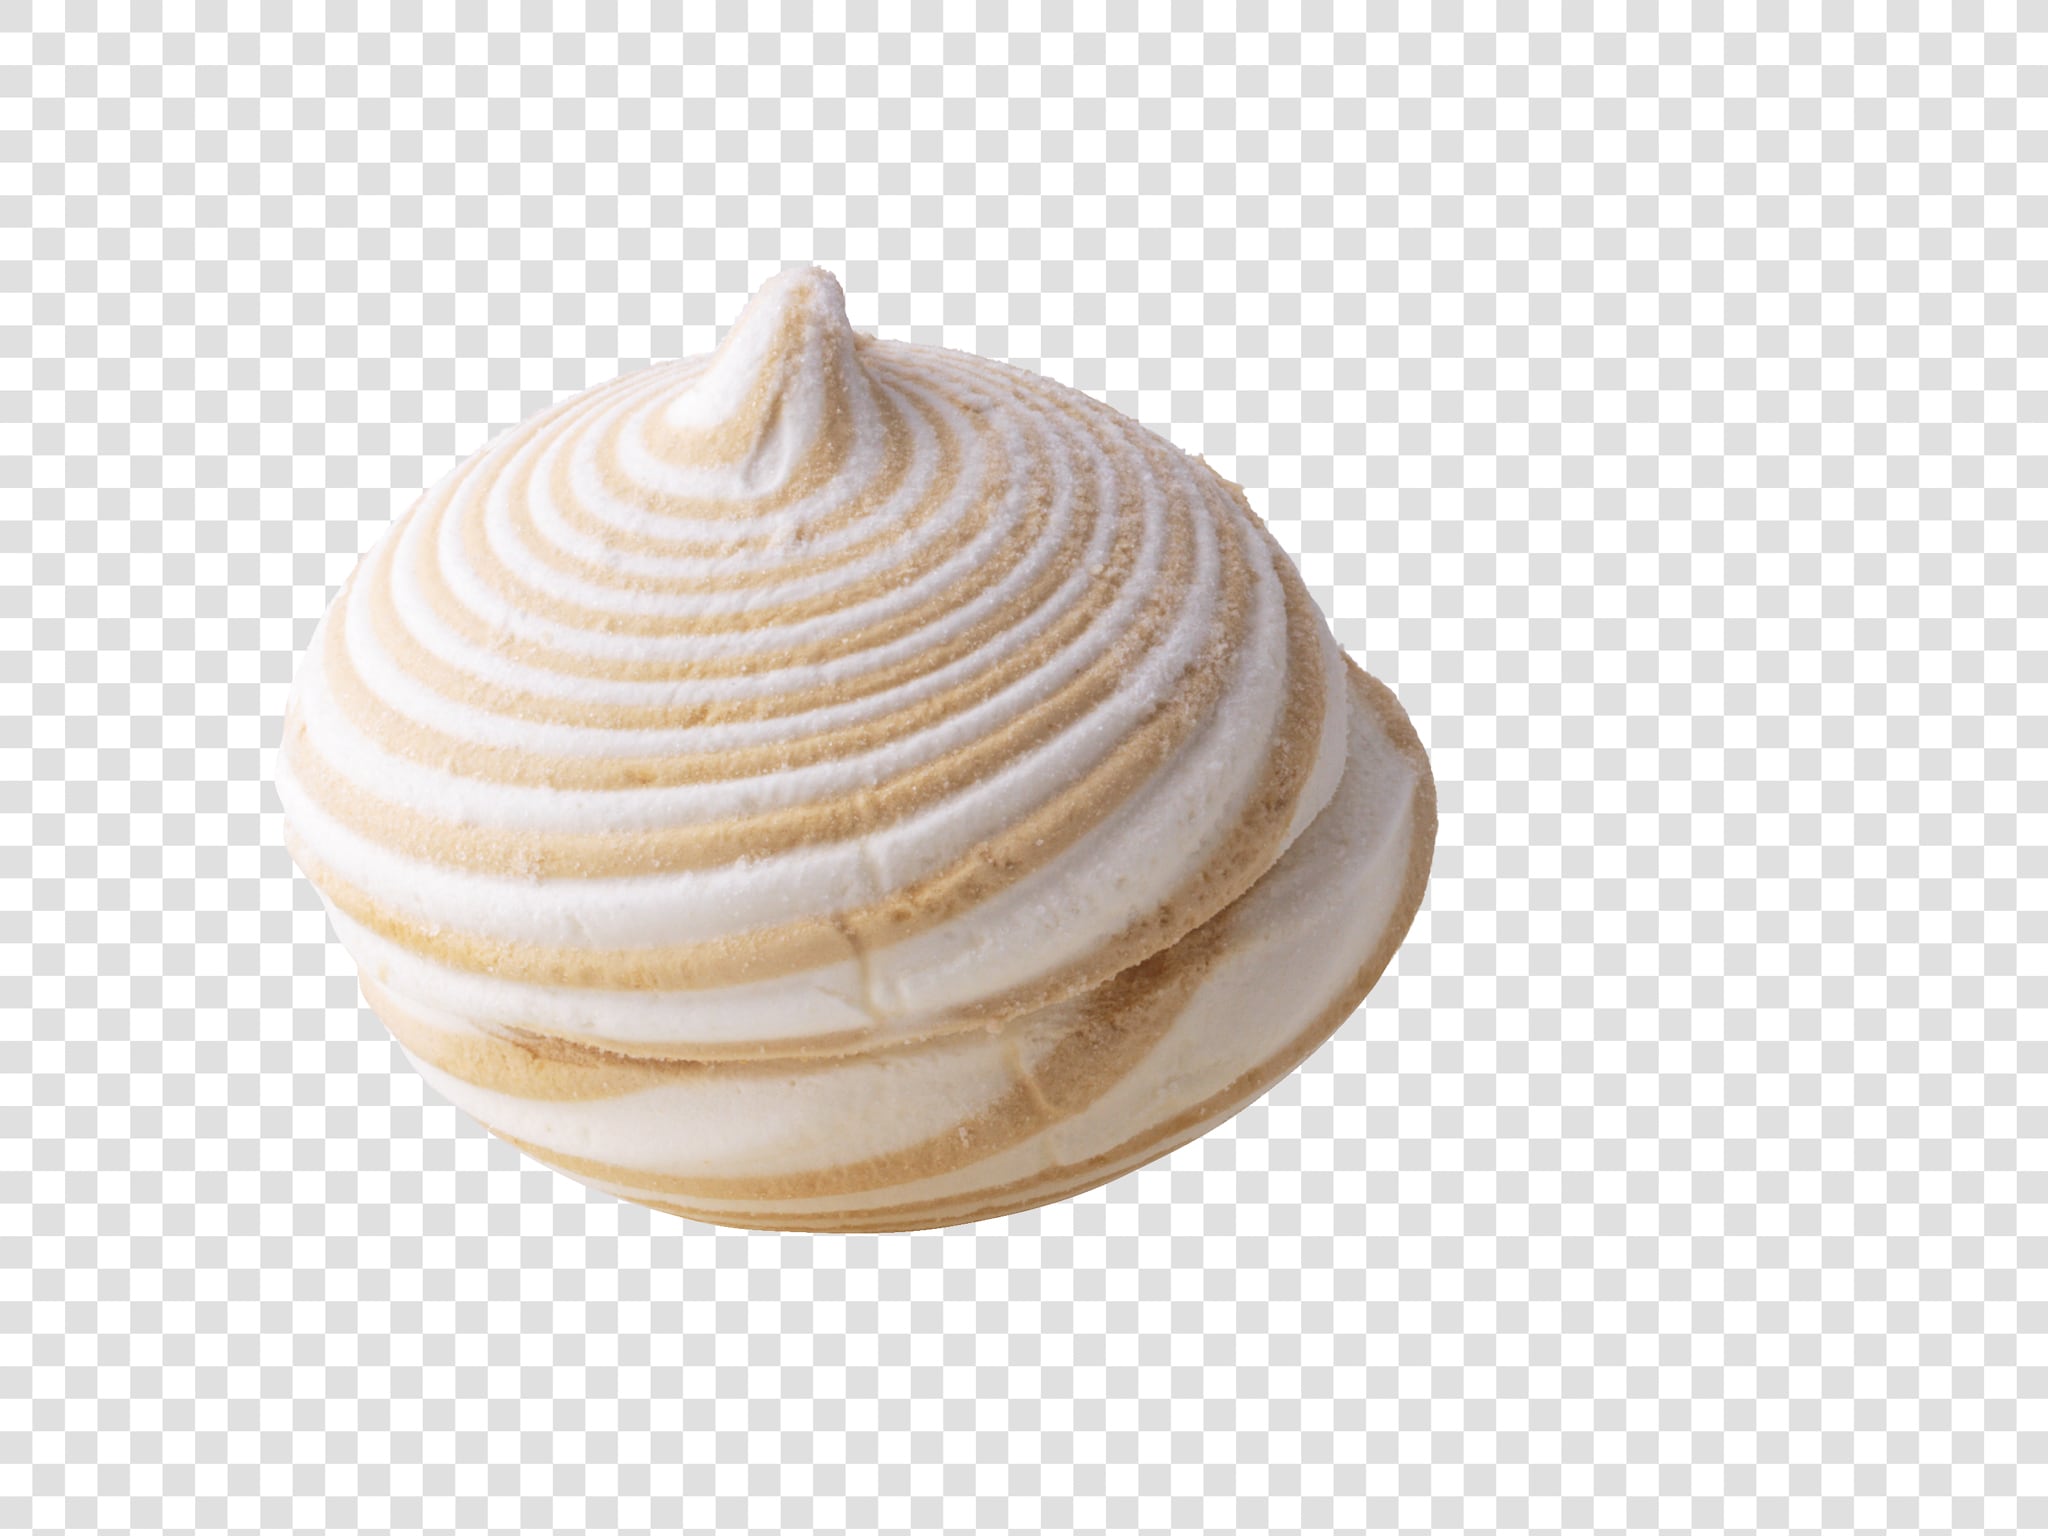 Marshmallow image with transparent background